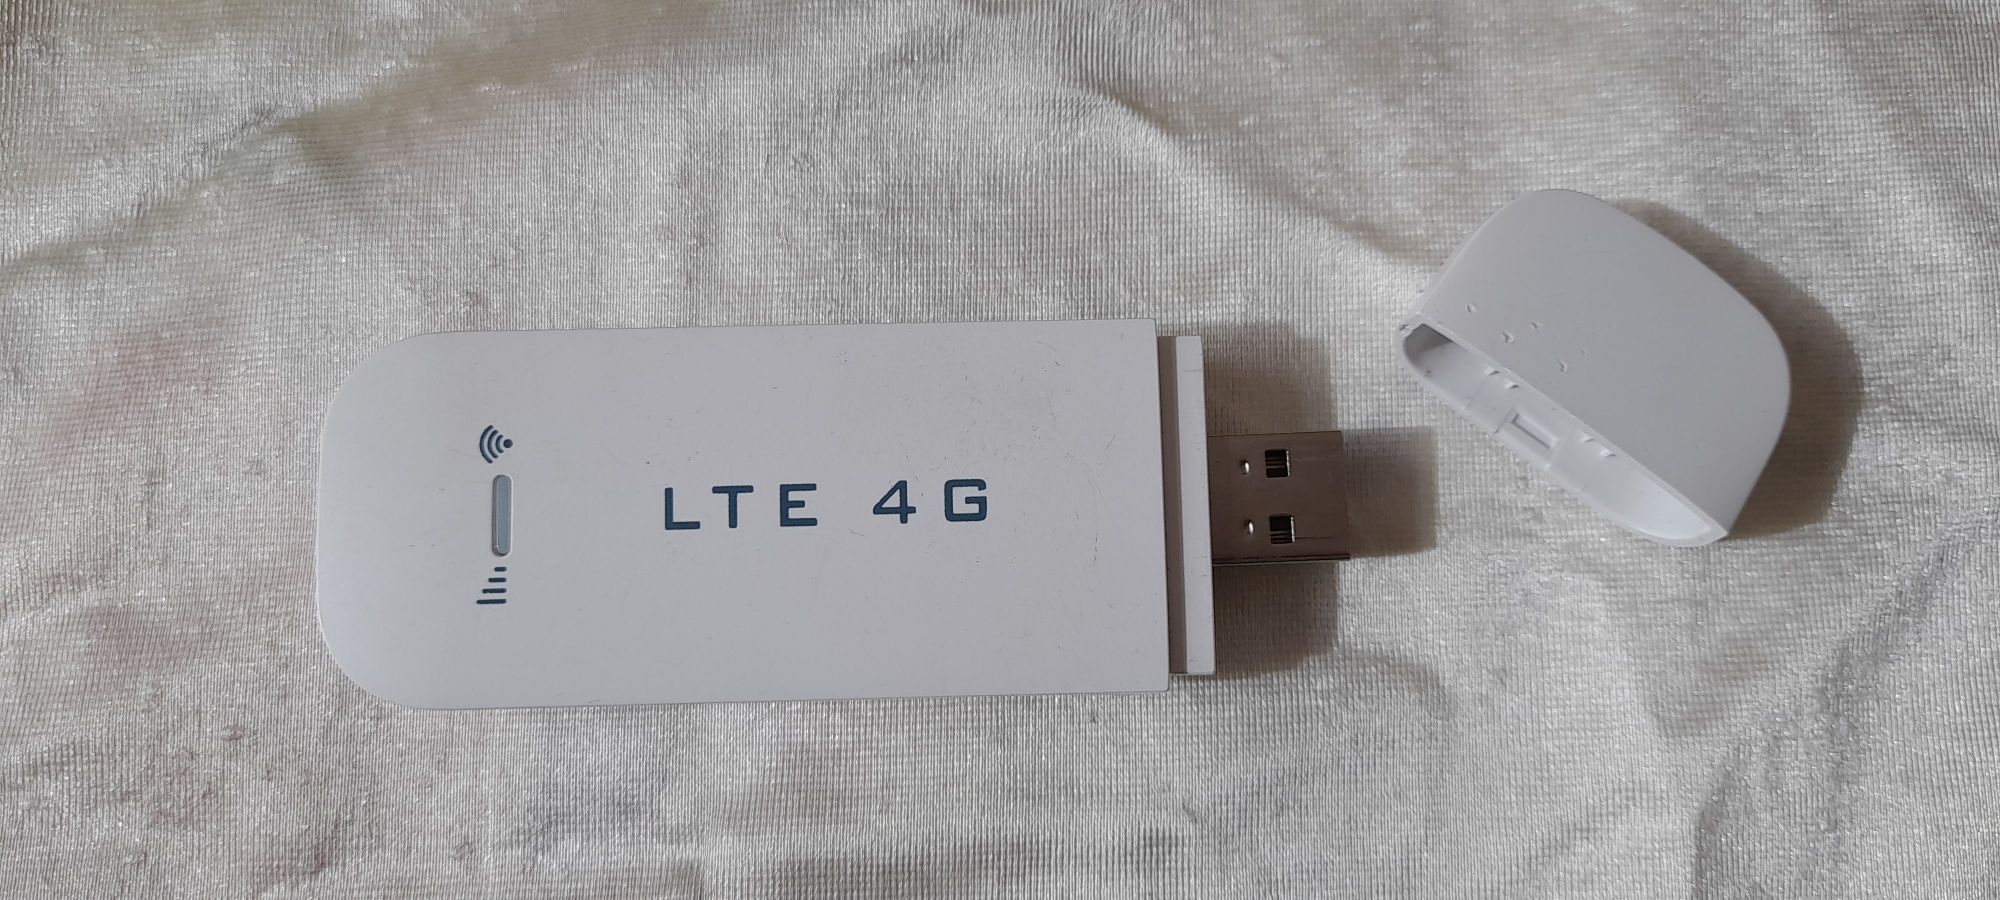 4G WiFi LTE Dongle